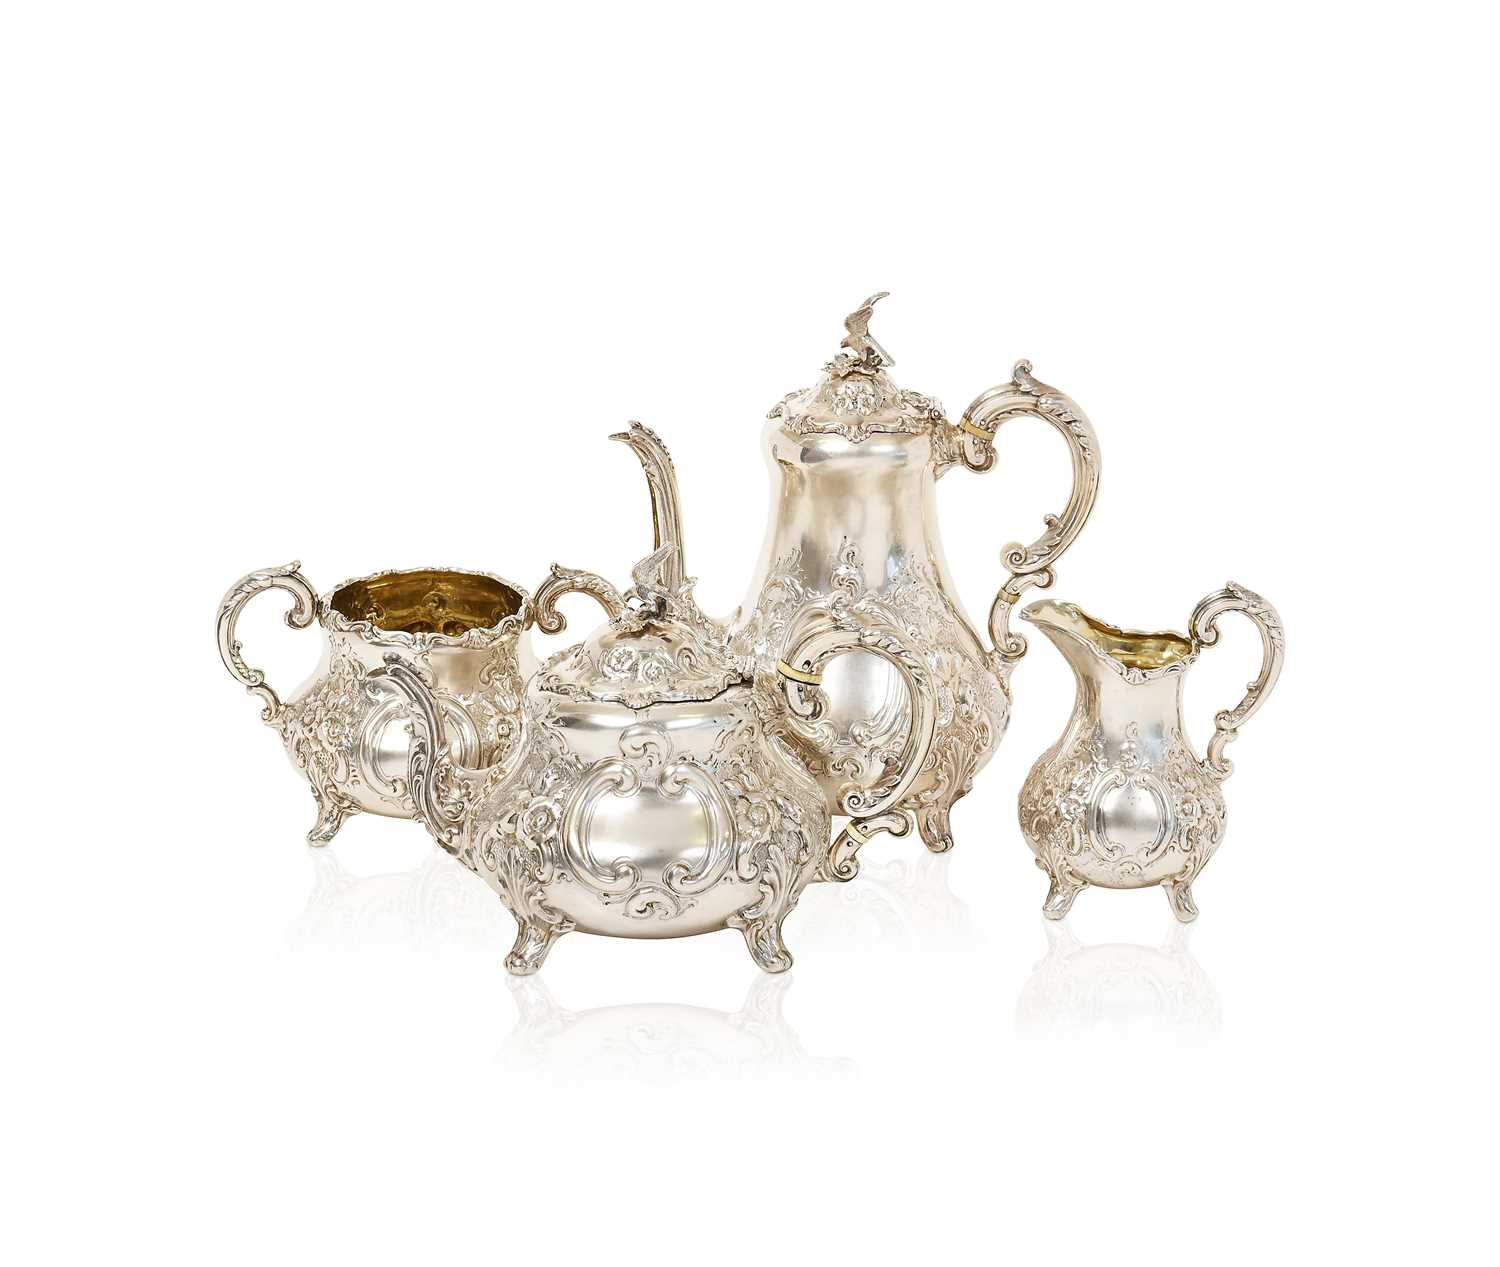 Lot 2092 - A Four-Piece Victorian Silver Tea and Coffee-Service